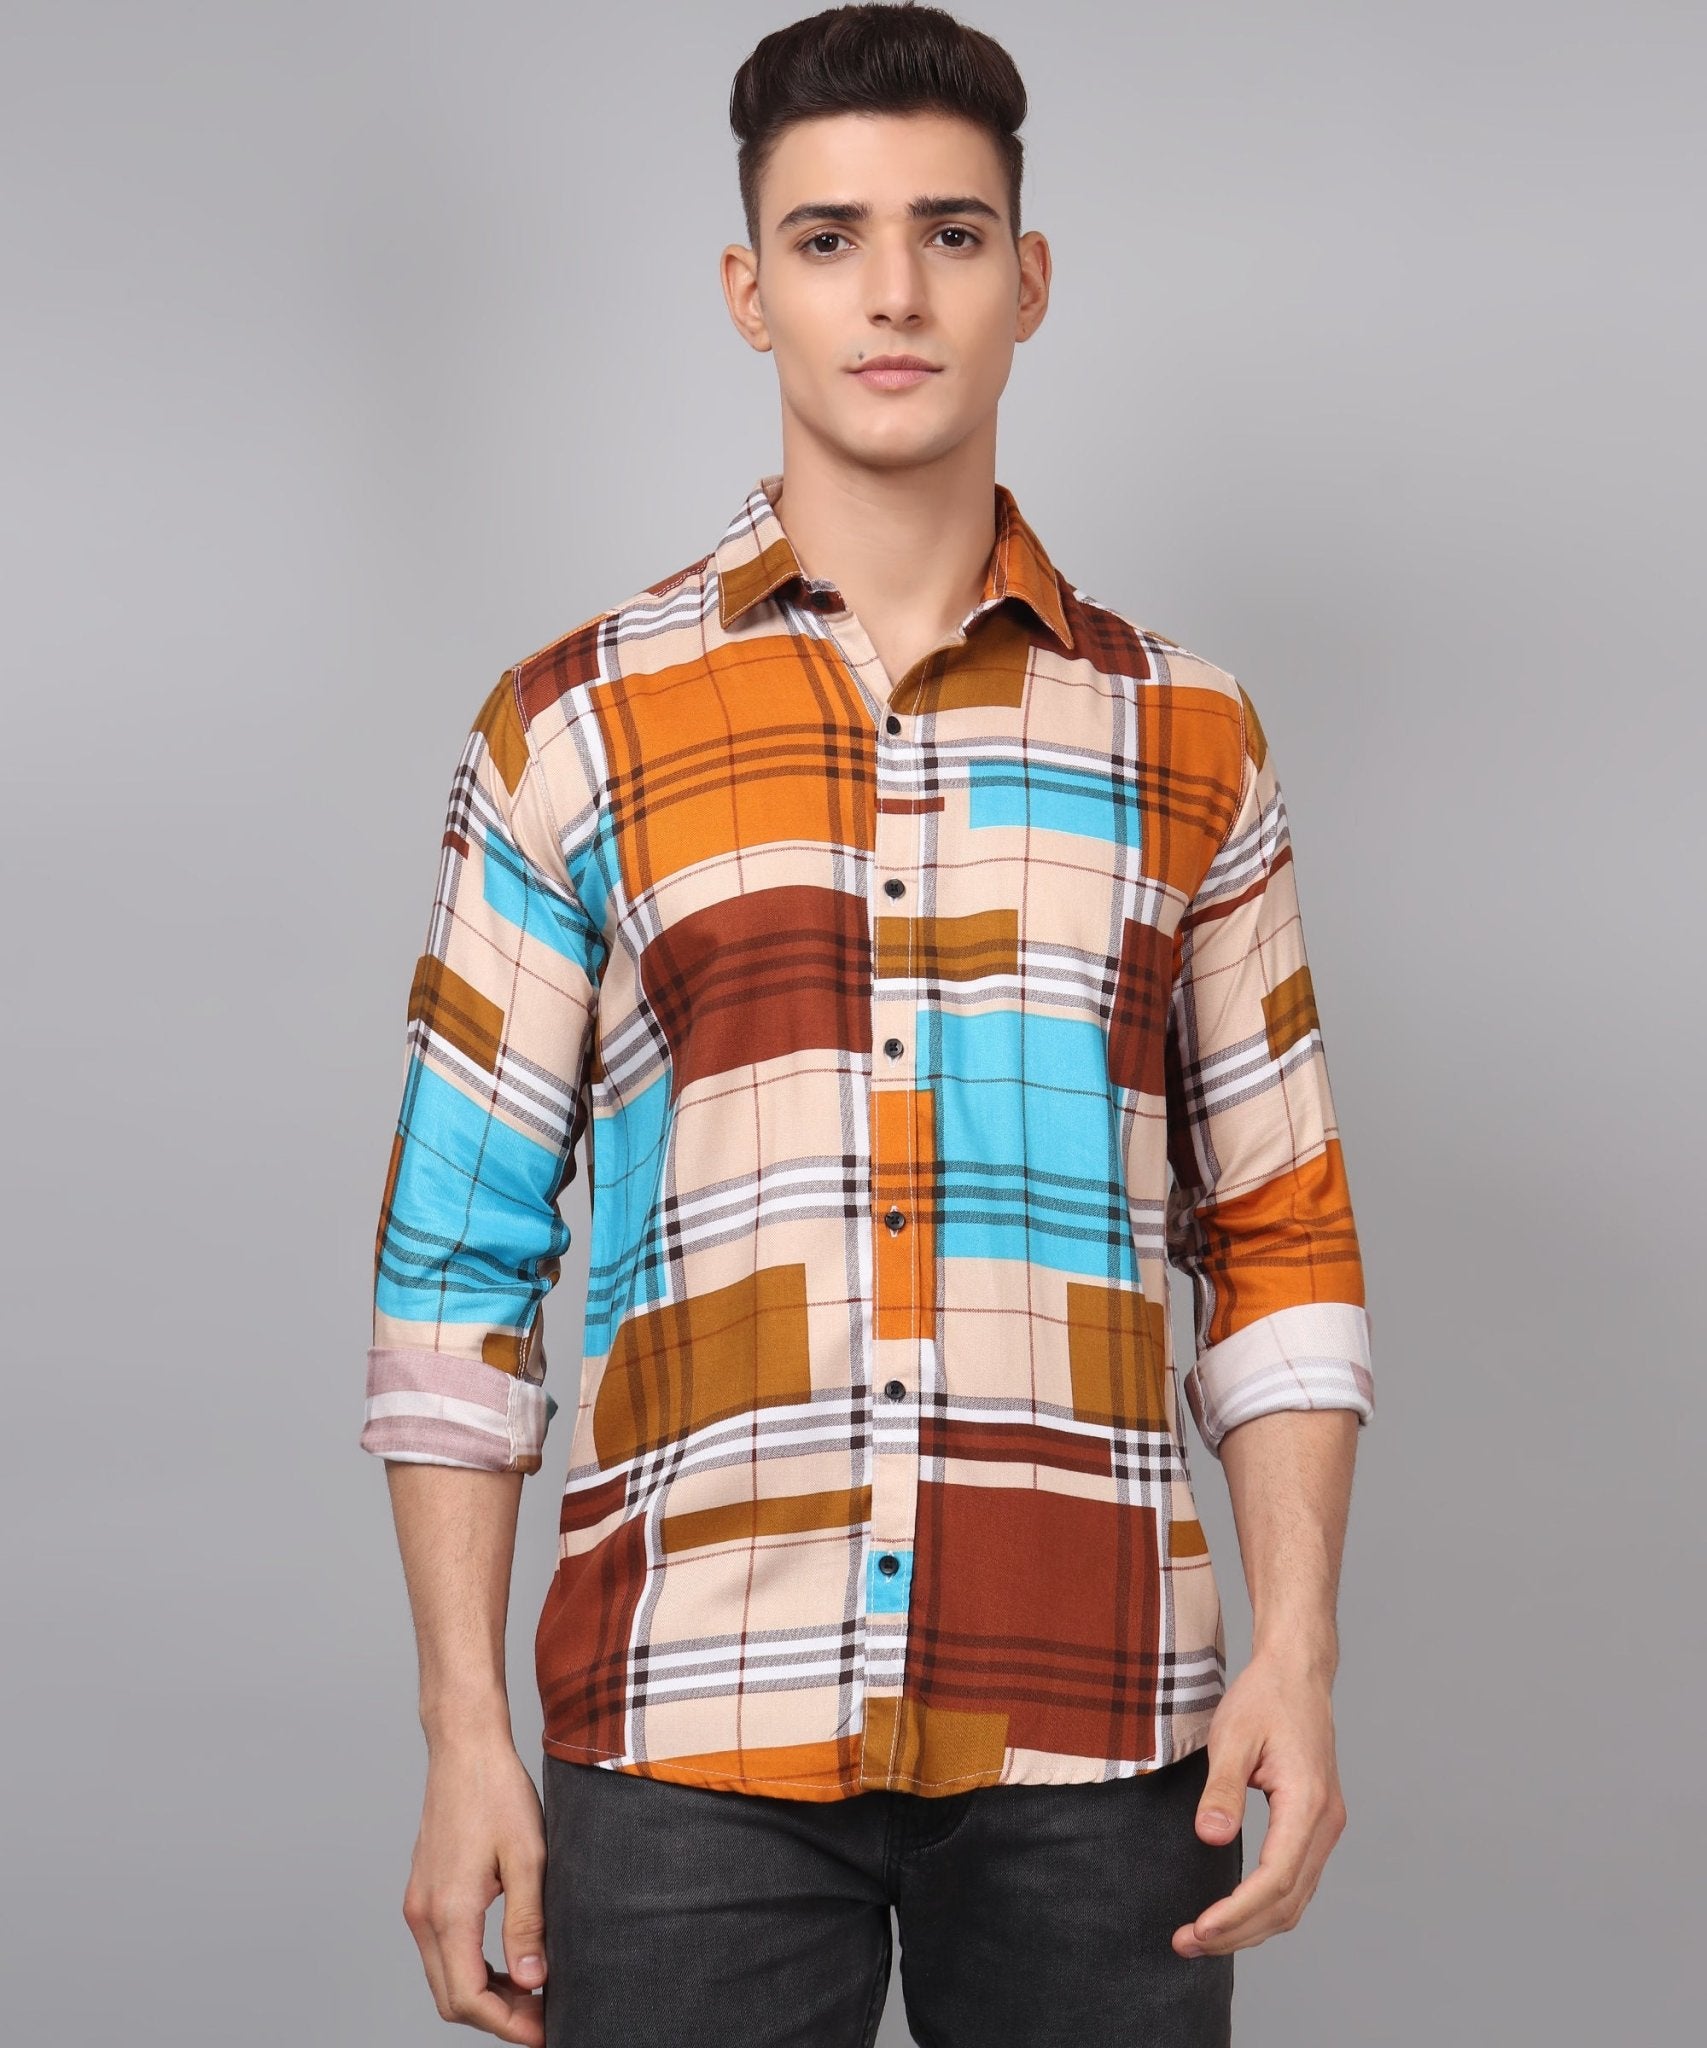 Trybuy Premium Printed Multi Colored Cotton Casual Shirt for Men - TryBuy® USA🇺🇸